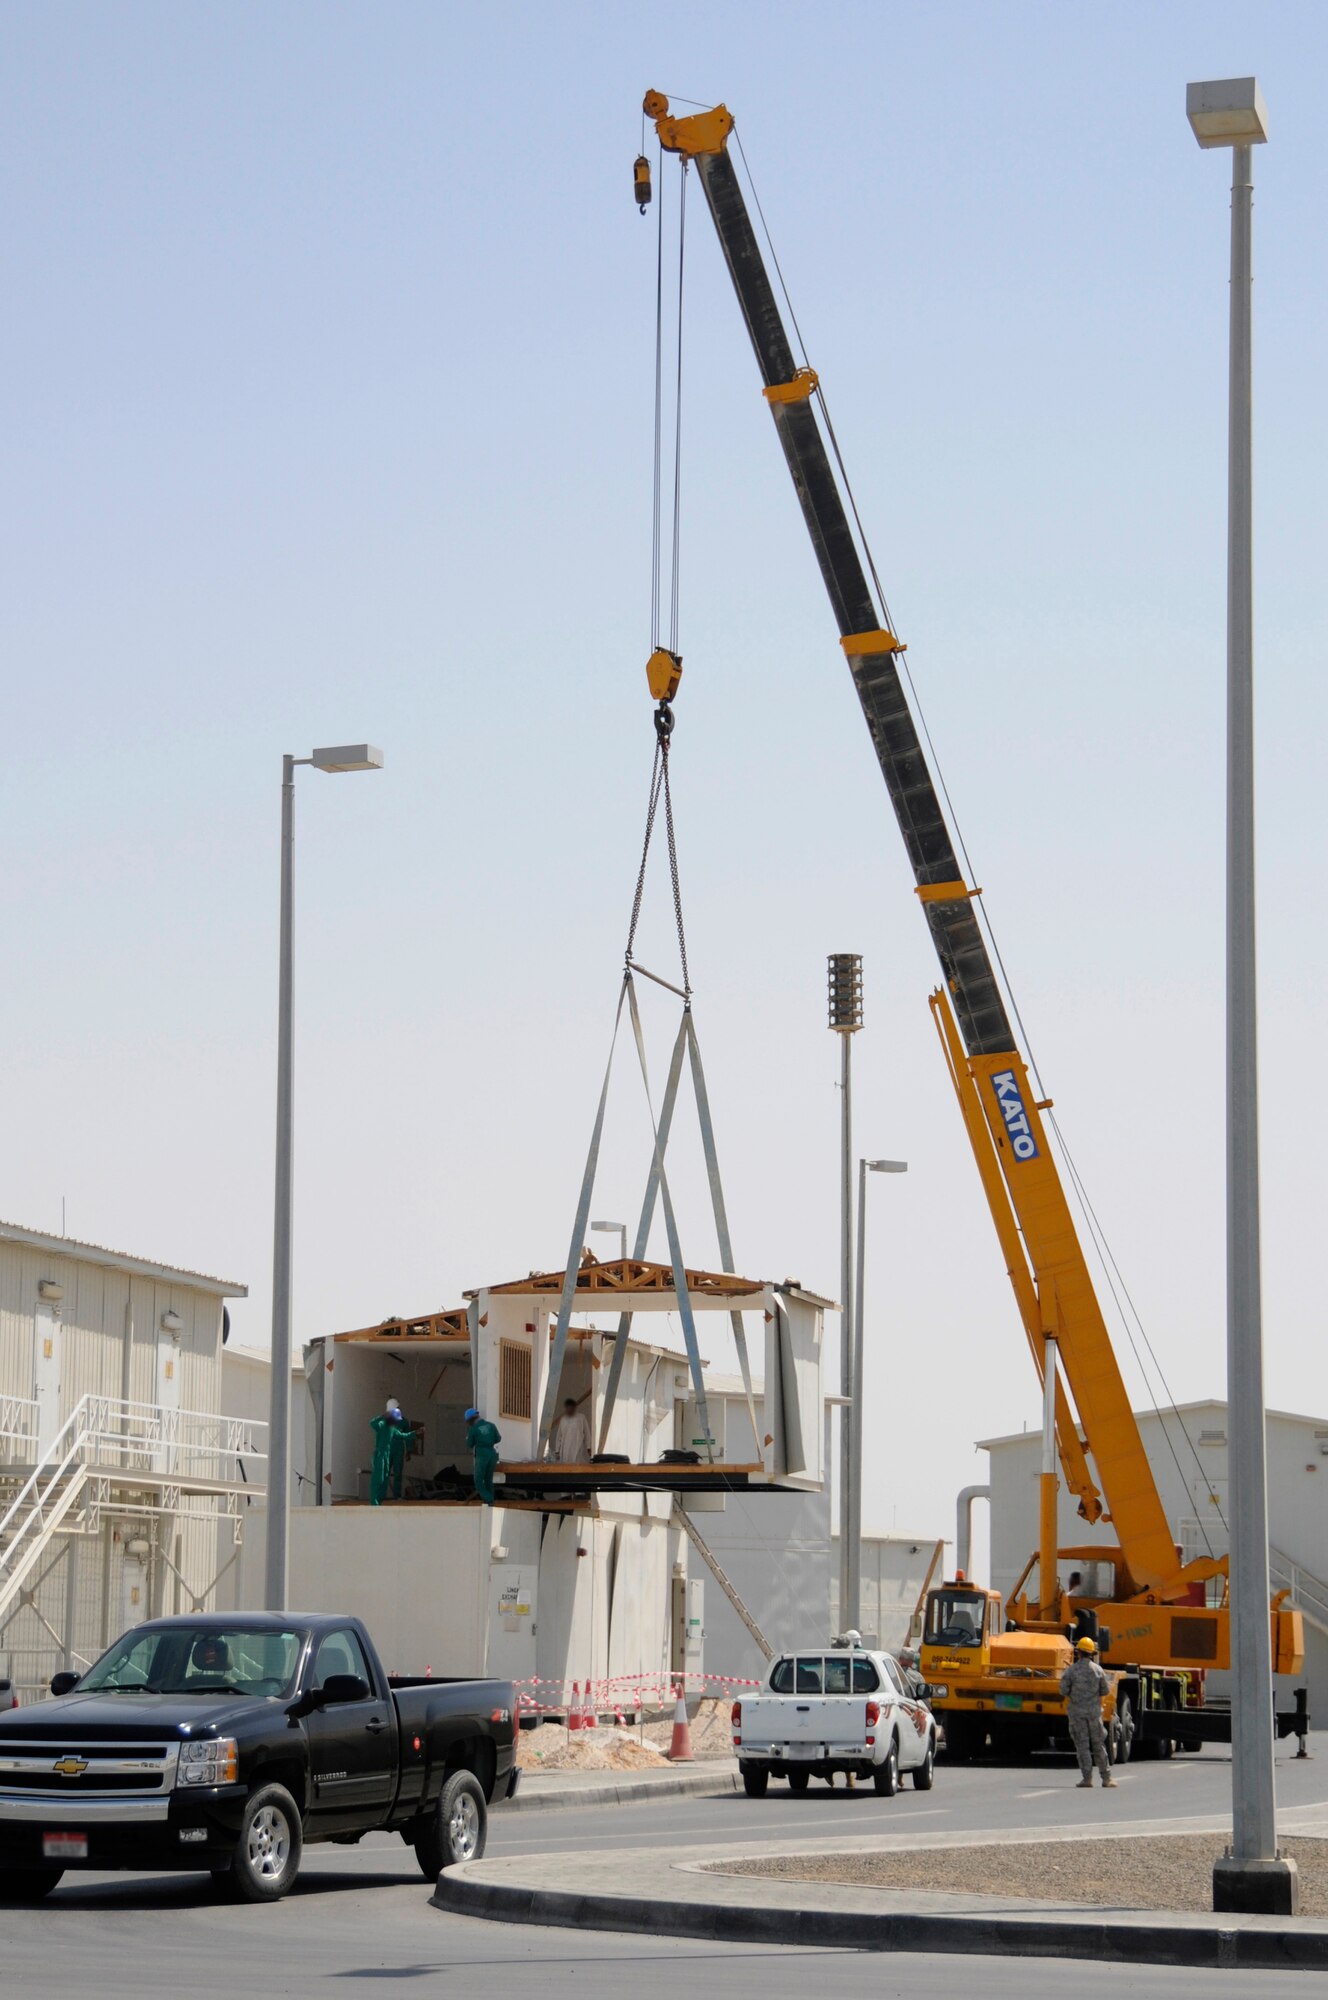 SOUTHWEST ASIA - A crane operated by a third country national lifts a section of the second story of a building onto its base, Mar 19. The building is used for lodging where new Airman and Soldiers can acquire room assignments and keys as well as pick-up linen for their beds. The lodging building was moved to make room for dormitory expansion. (U.S. Air Force photo by Senior Airman Brian J. Ellis) (Released)